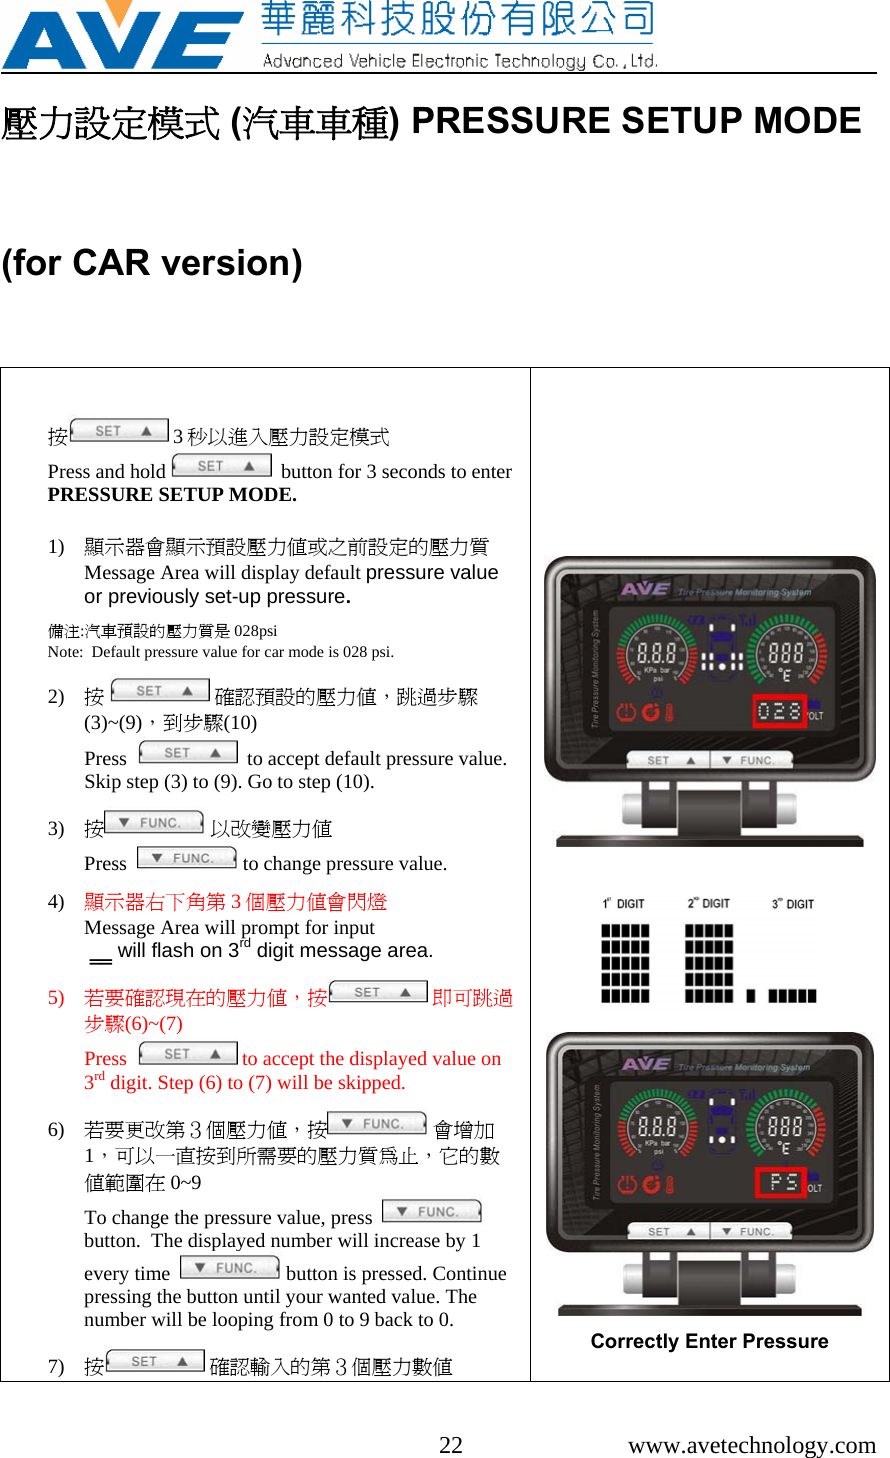     22 www.avetechnology.com 壓力設定模式 (汽車車種) PRESSURE SETUP MODE (for CAR version)   按 3秒以進入壓力設定模式                            Press and hold    button for 3 seconds to enter PRESSURE SETUP MODE.   1) 顯示器會顯示預設壓力值或之前設定的壓力質Message Area will display default pressure value or previously set-up pressure.  備注:汽車預設的壓力質是 028psi                                                   Note:  Default pressure value for car mode is 028 psi.  2) 按  確認預設的壓力值，跳過步驟(3)~(9)，到步驟(10)                                                      Press     to accept default pressure value. Skip step (3) to (9). Go to step (10).  3) 按 以改變壓力值                                        Press    to change pressure value.  4) 顯示器右下角第 3個壓力值會閃燈             Message Area will prompt for input  ‗‗ will flash on 3rd digit message area.  5) 若要確認現在的壓力值，按  即可跳過步驟(6)~(7)                                                         Press    to accept the displayed value on 3rd digit. Step (6) to (7) will be skipped.  6) 若要更改第３個壓力值，按  會增加1，可以一直按到所需要的壓力質為止，它的數值範圍在 0~9                                                                 To change the pressure value, press    button.  The displayed number will increase by 1 every time    button is pressed. Continue pressing the button until your wanted value. The number will be looping from 0 to 9 back to 0.    7) 按 確認輸入的第３個壓力數值                      Correctly Enter Pressure   